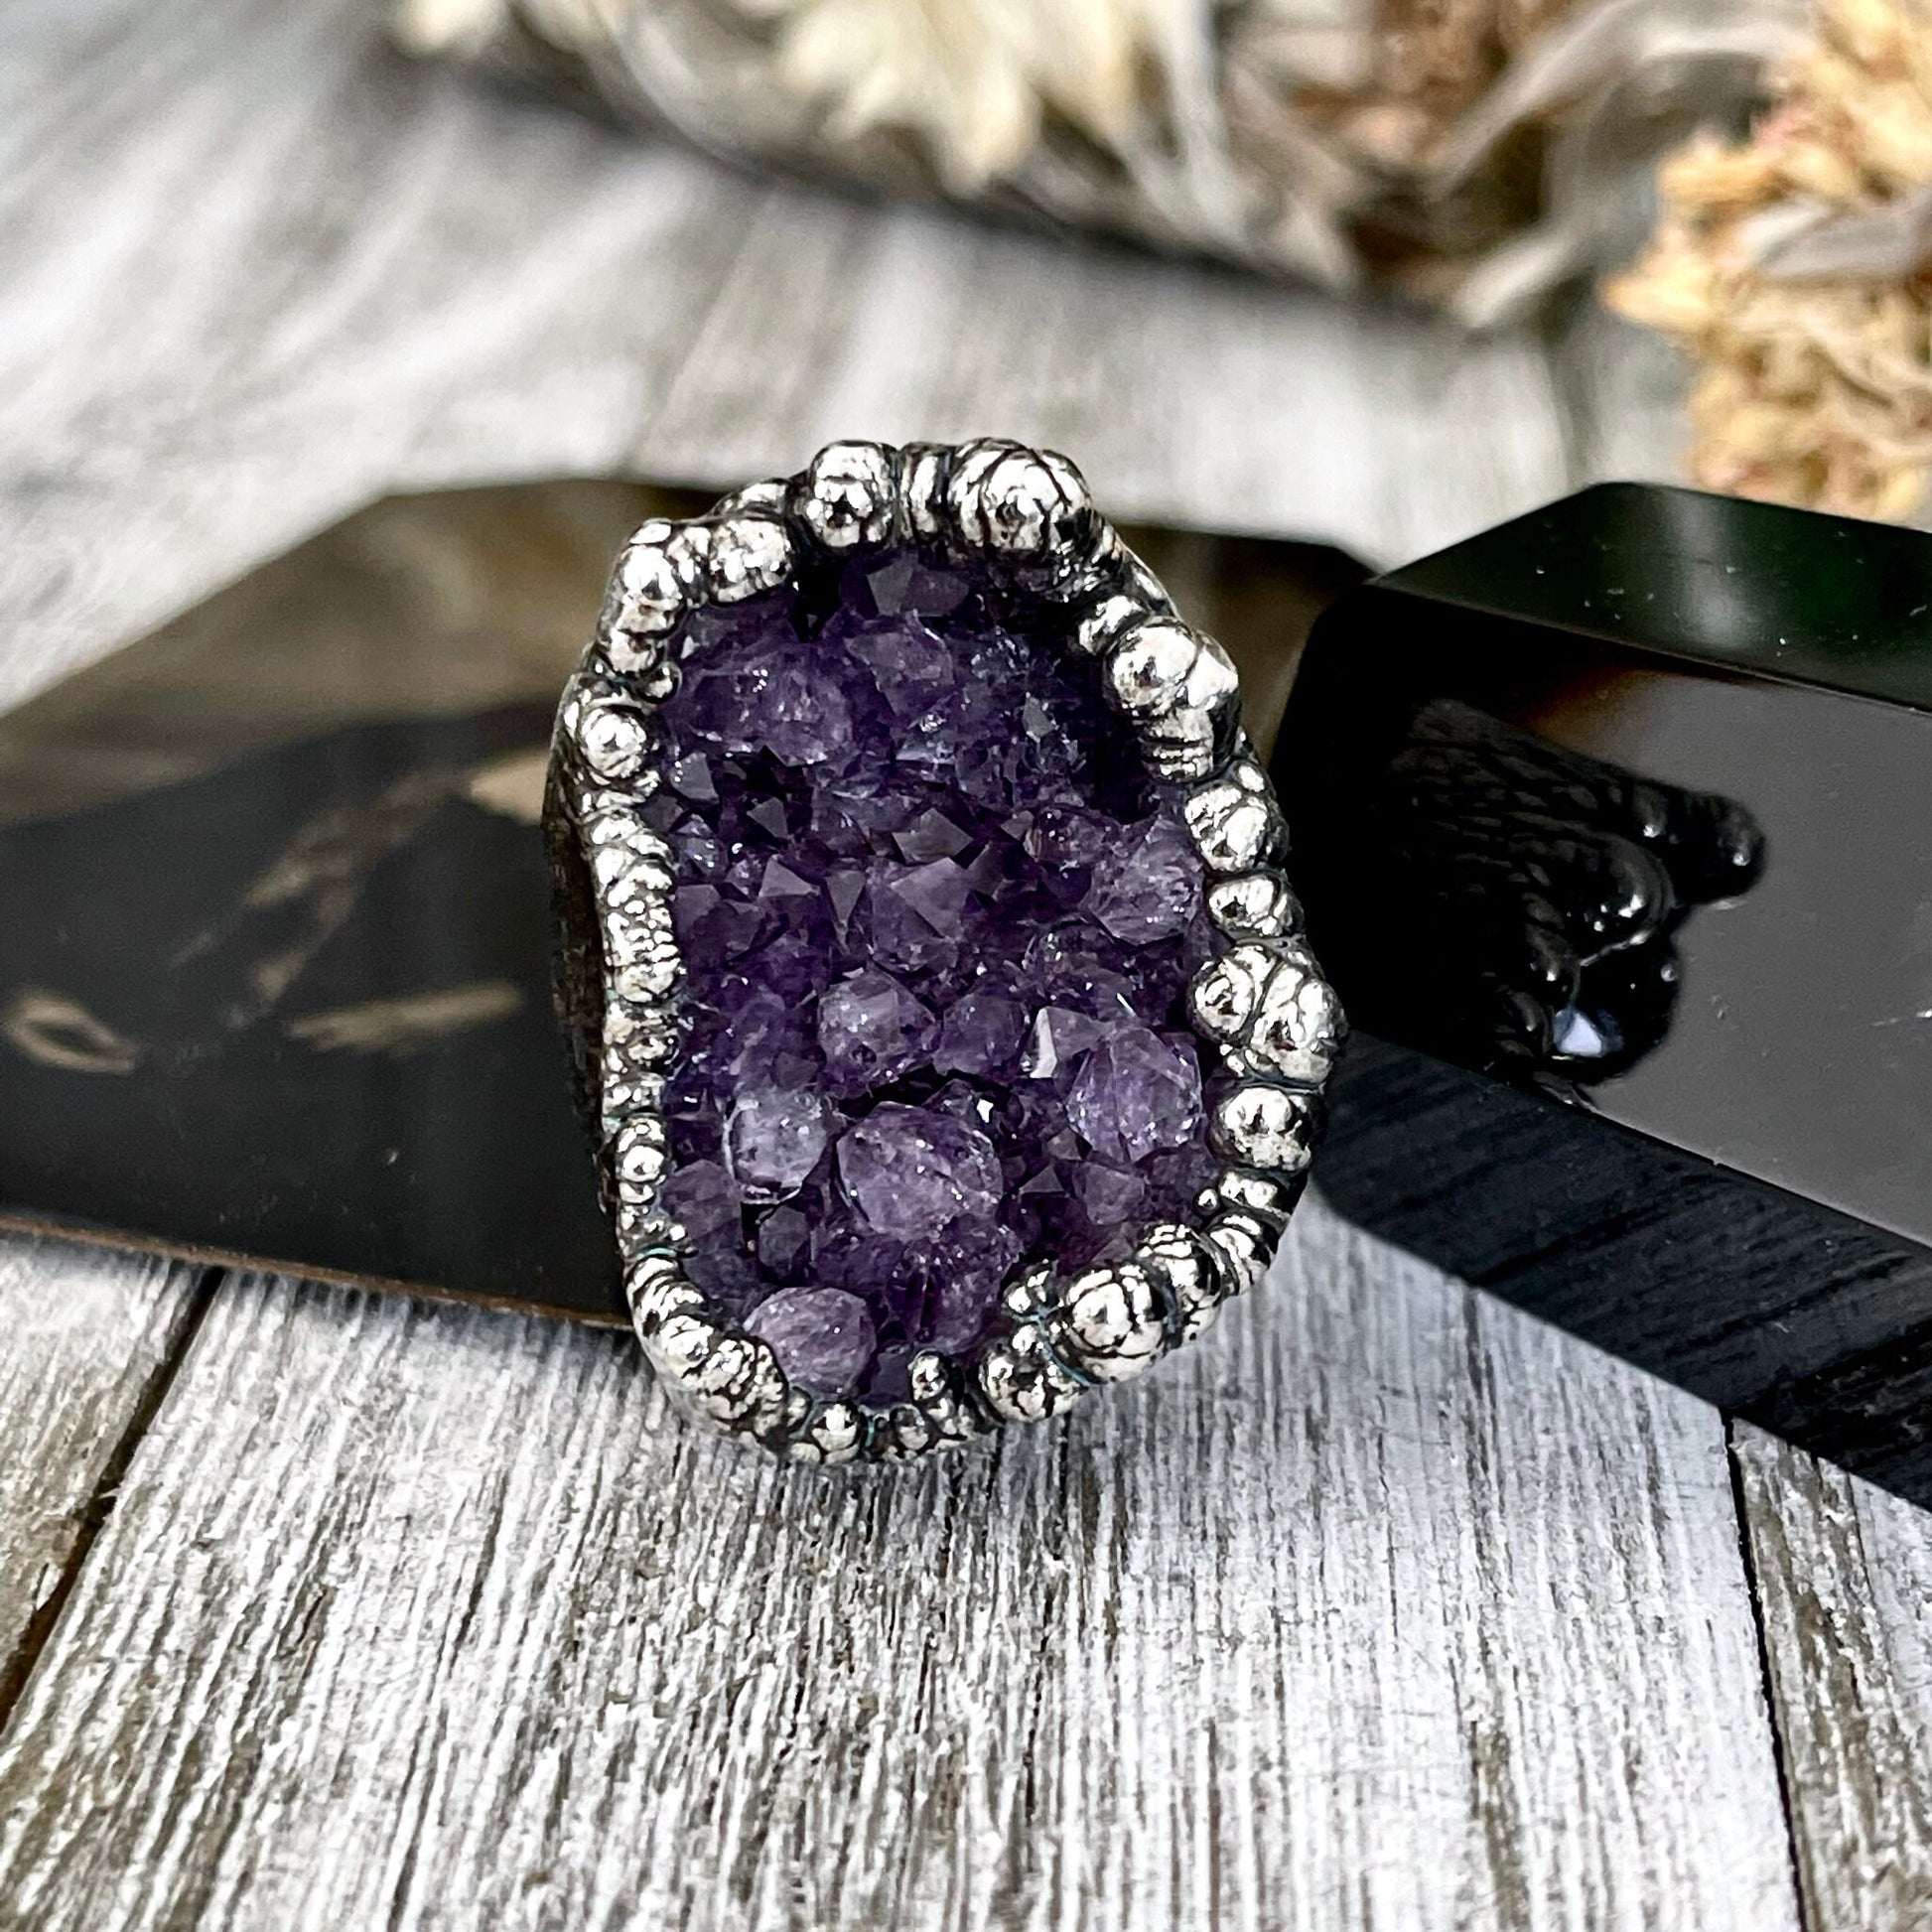 Size 8 Big Raw Amethyst Purple Crystal Ring in Fine Silver / Foxlark Collection - One of a Kind / Big Crystal Ring Witchy Jewelry Gemstone